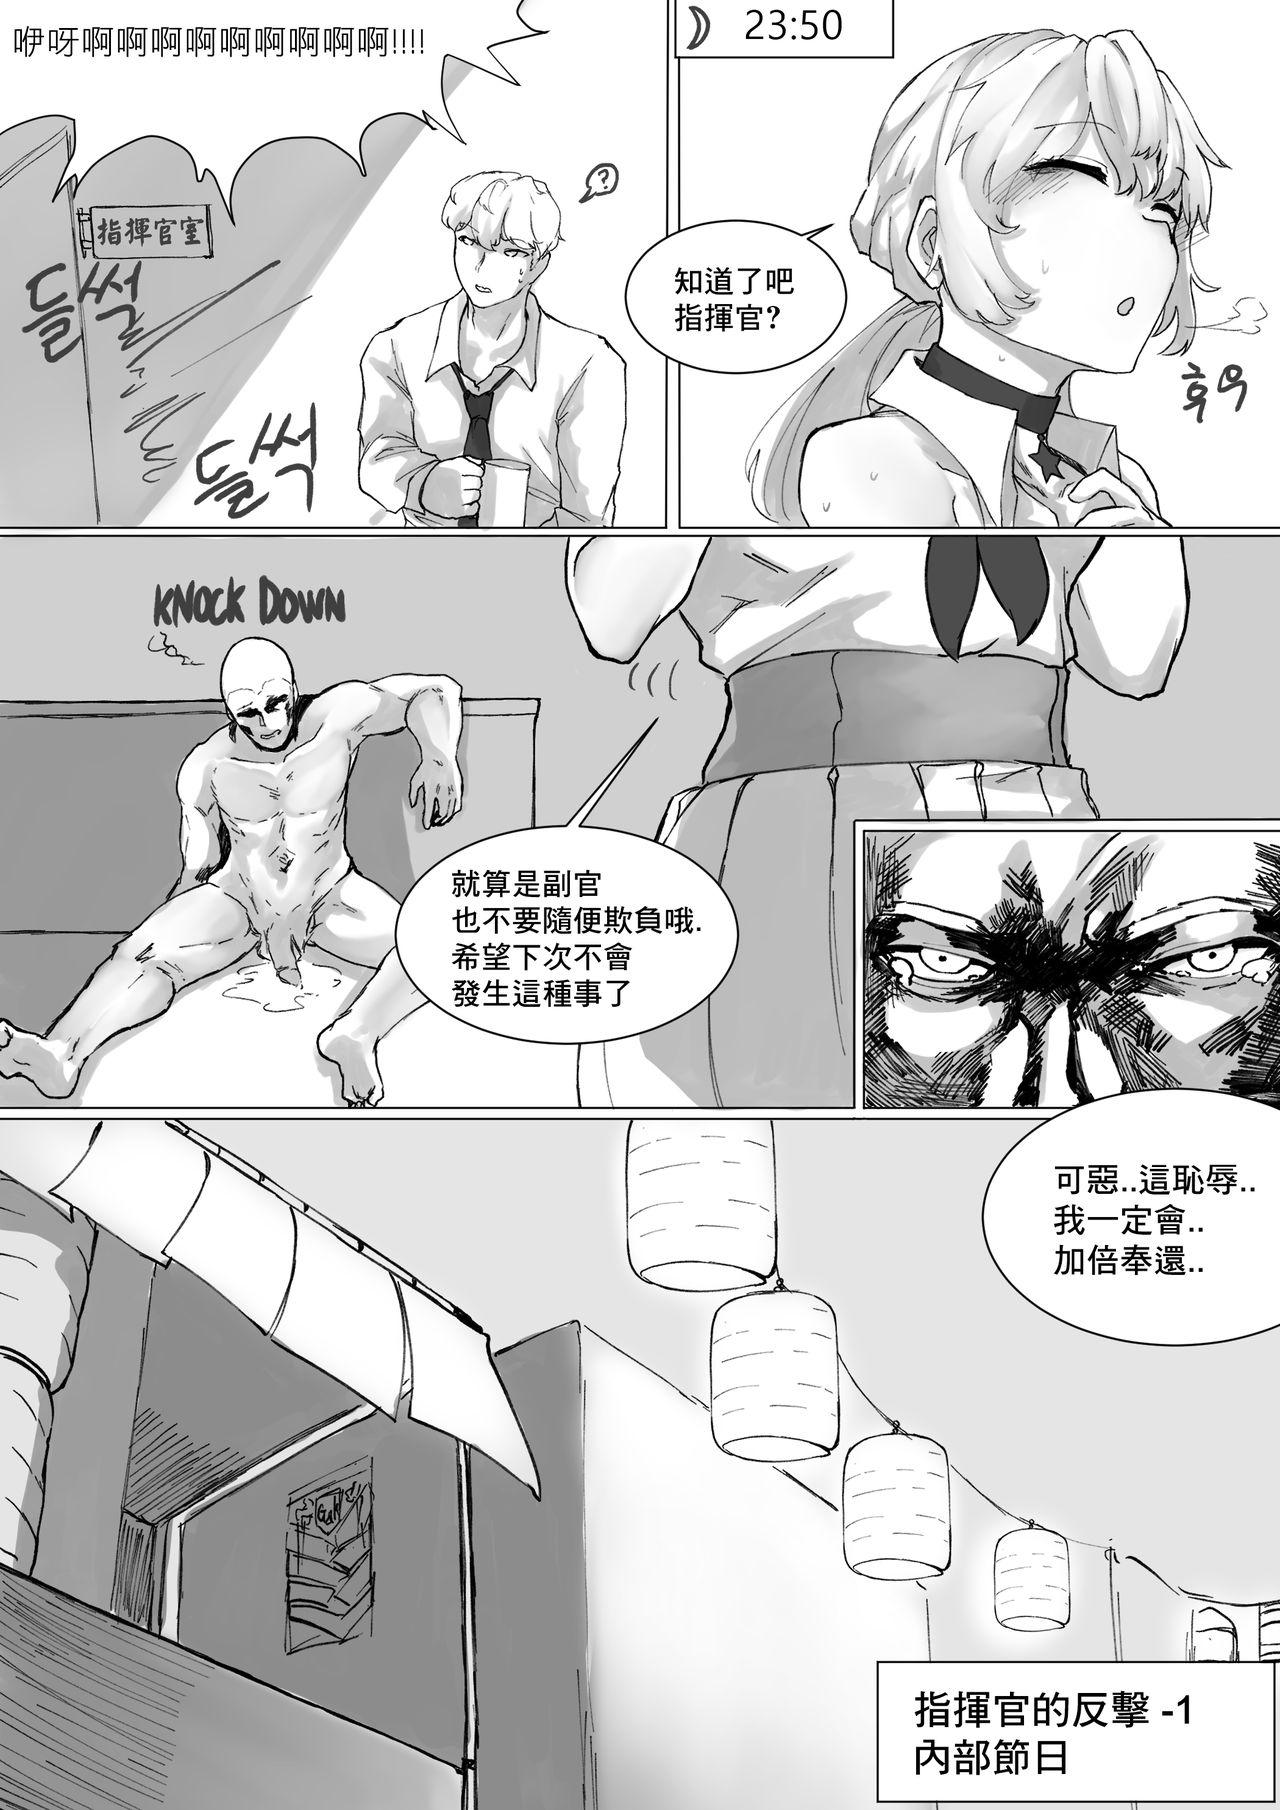 Tesao How To Use OTS-14 - Girls frontline Snatch - Page 9